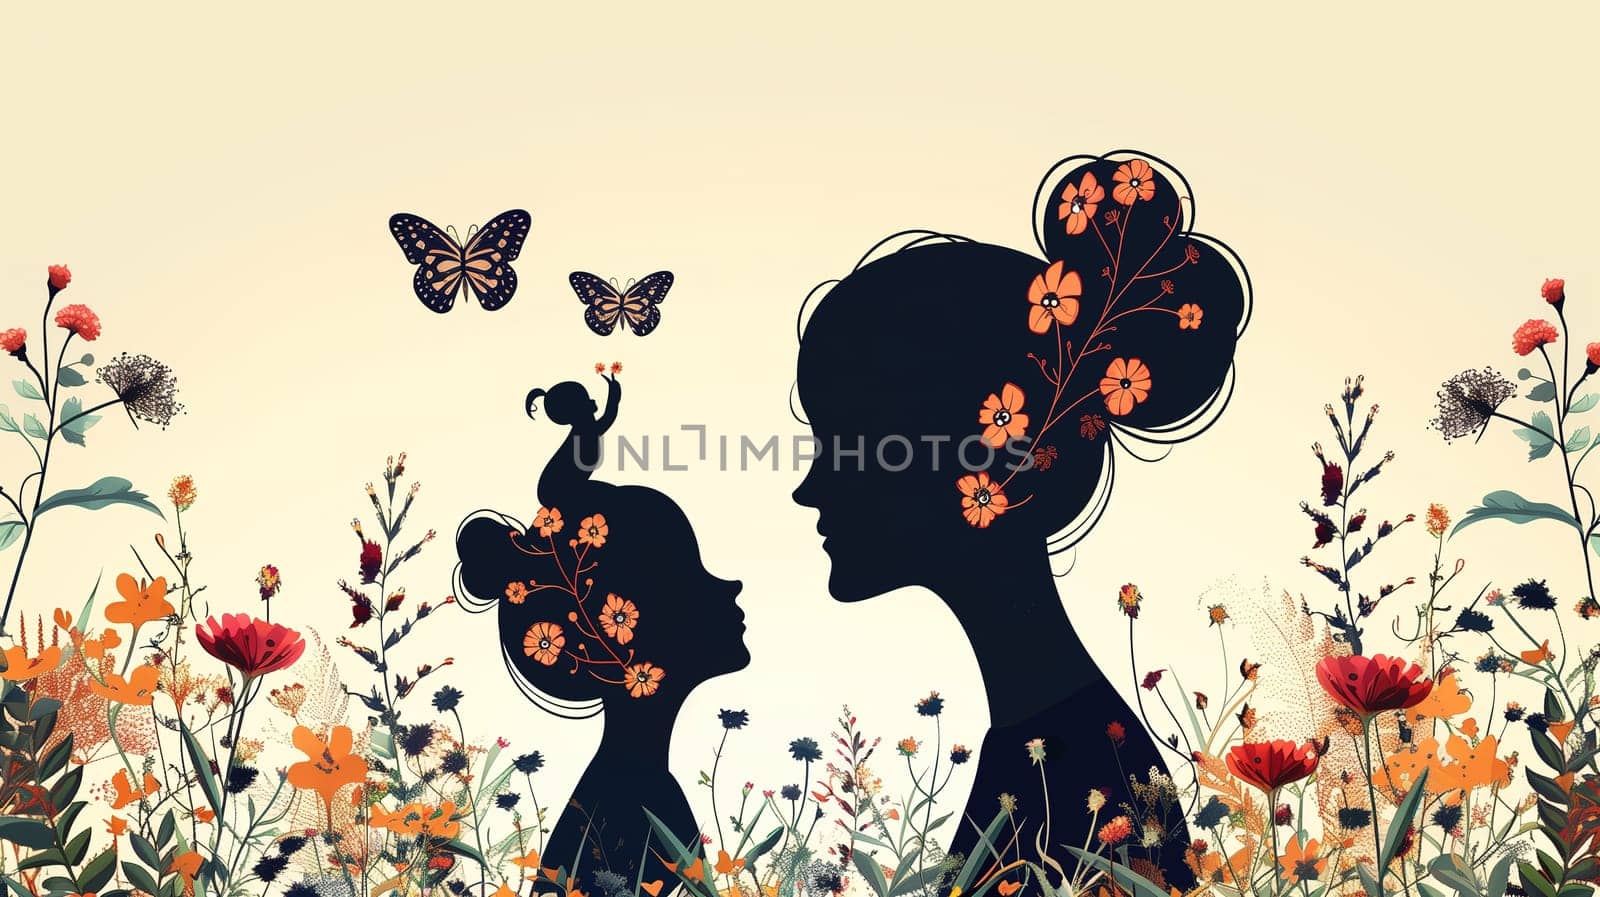 A woman and child are walking through a field of colorful flowers. The child holds the womans hand as they explore the vibrant flora surrounding them.